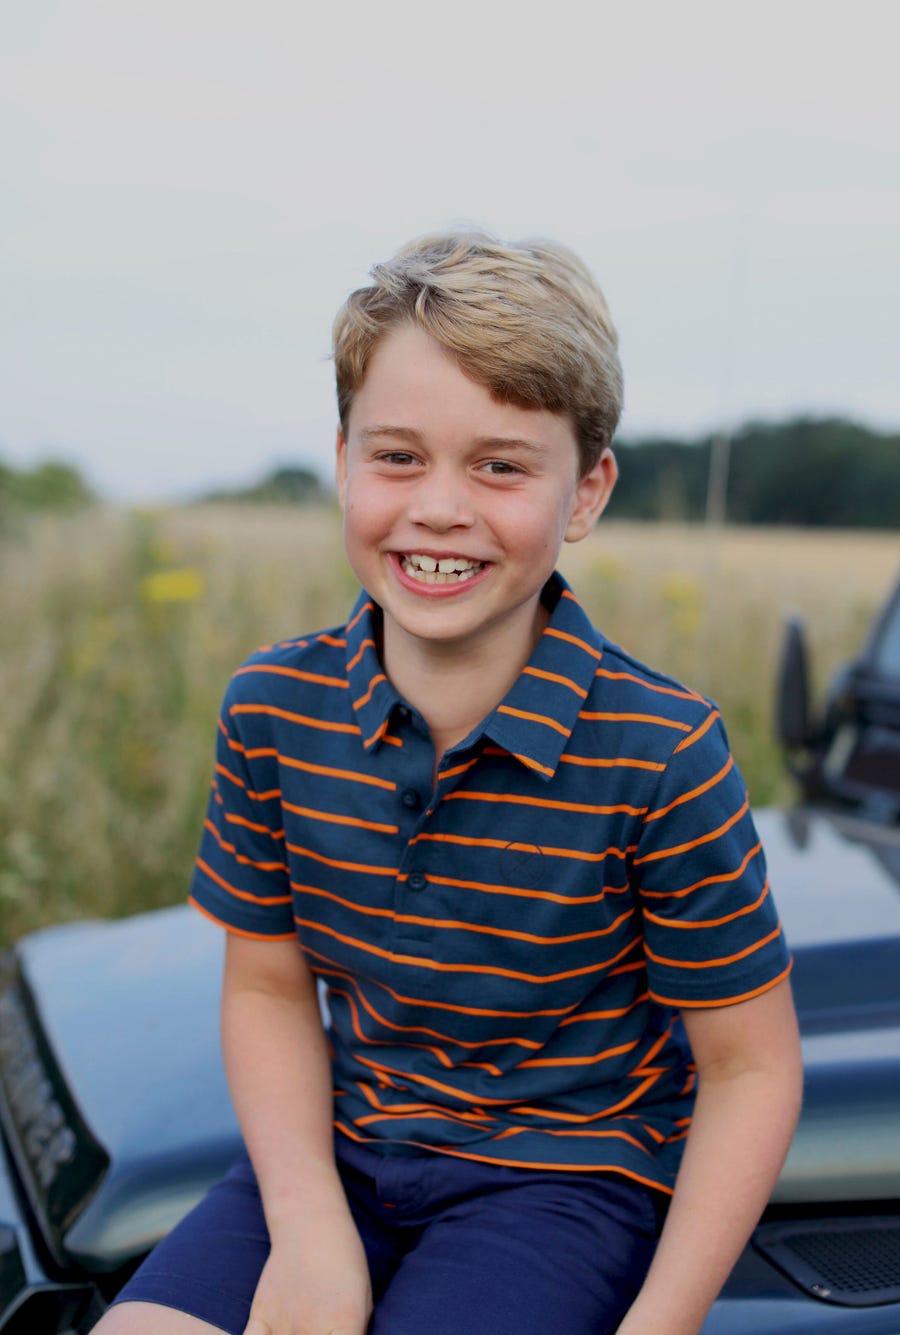 This July 2021 photo issued by Kensington Palace shows Prince George whose eighth birthday is on Thursday July 22, 2021, in Norfolk, England.